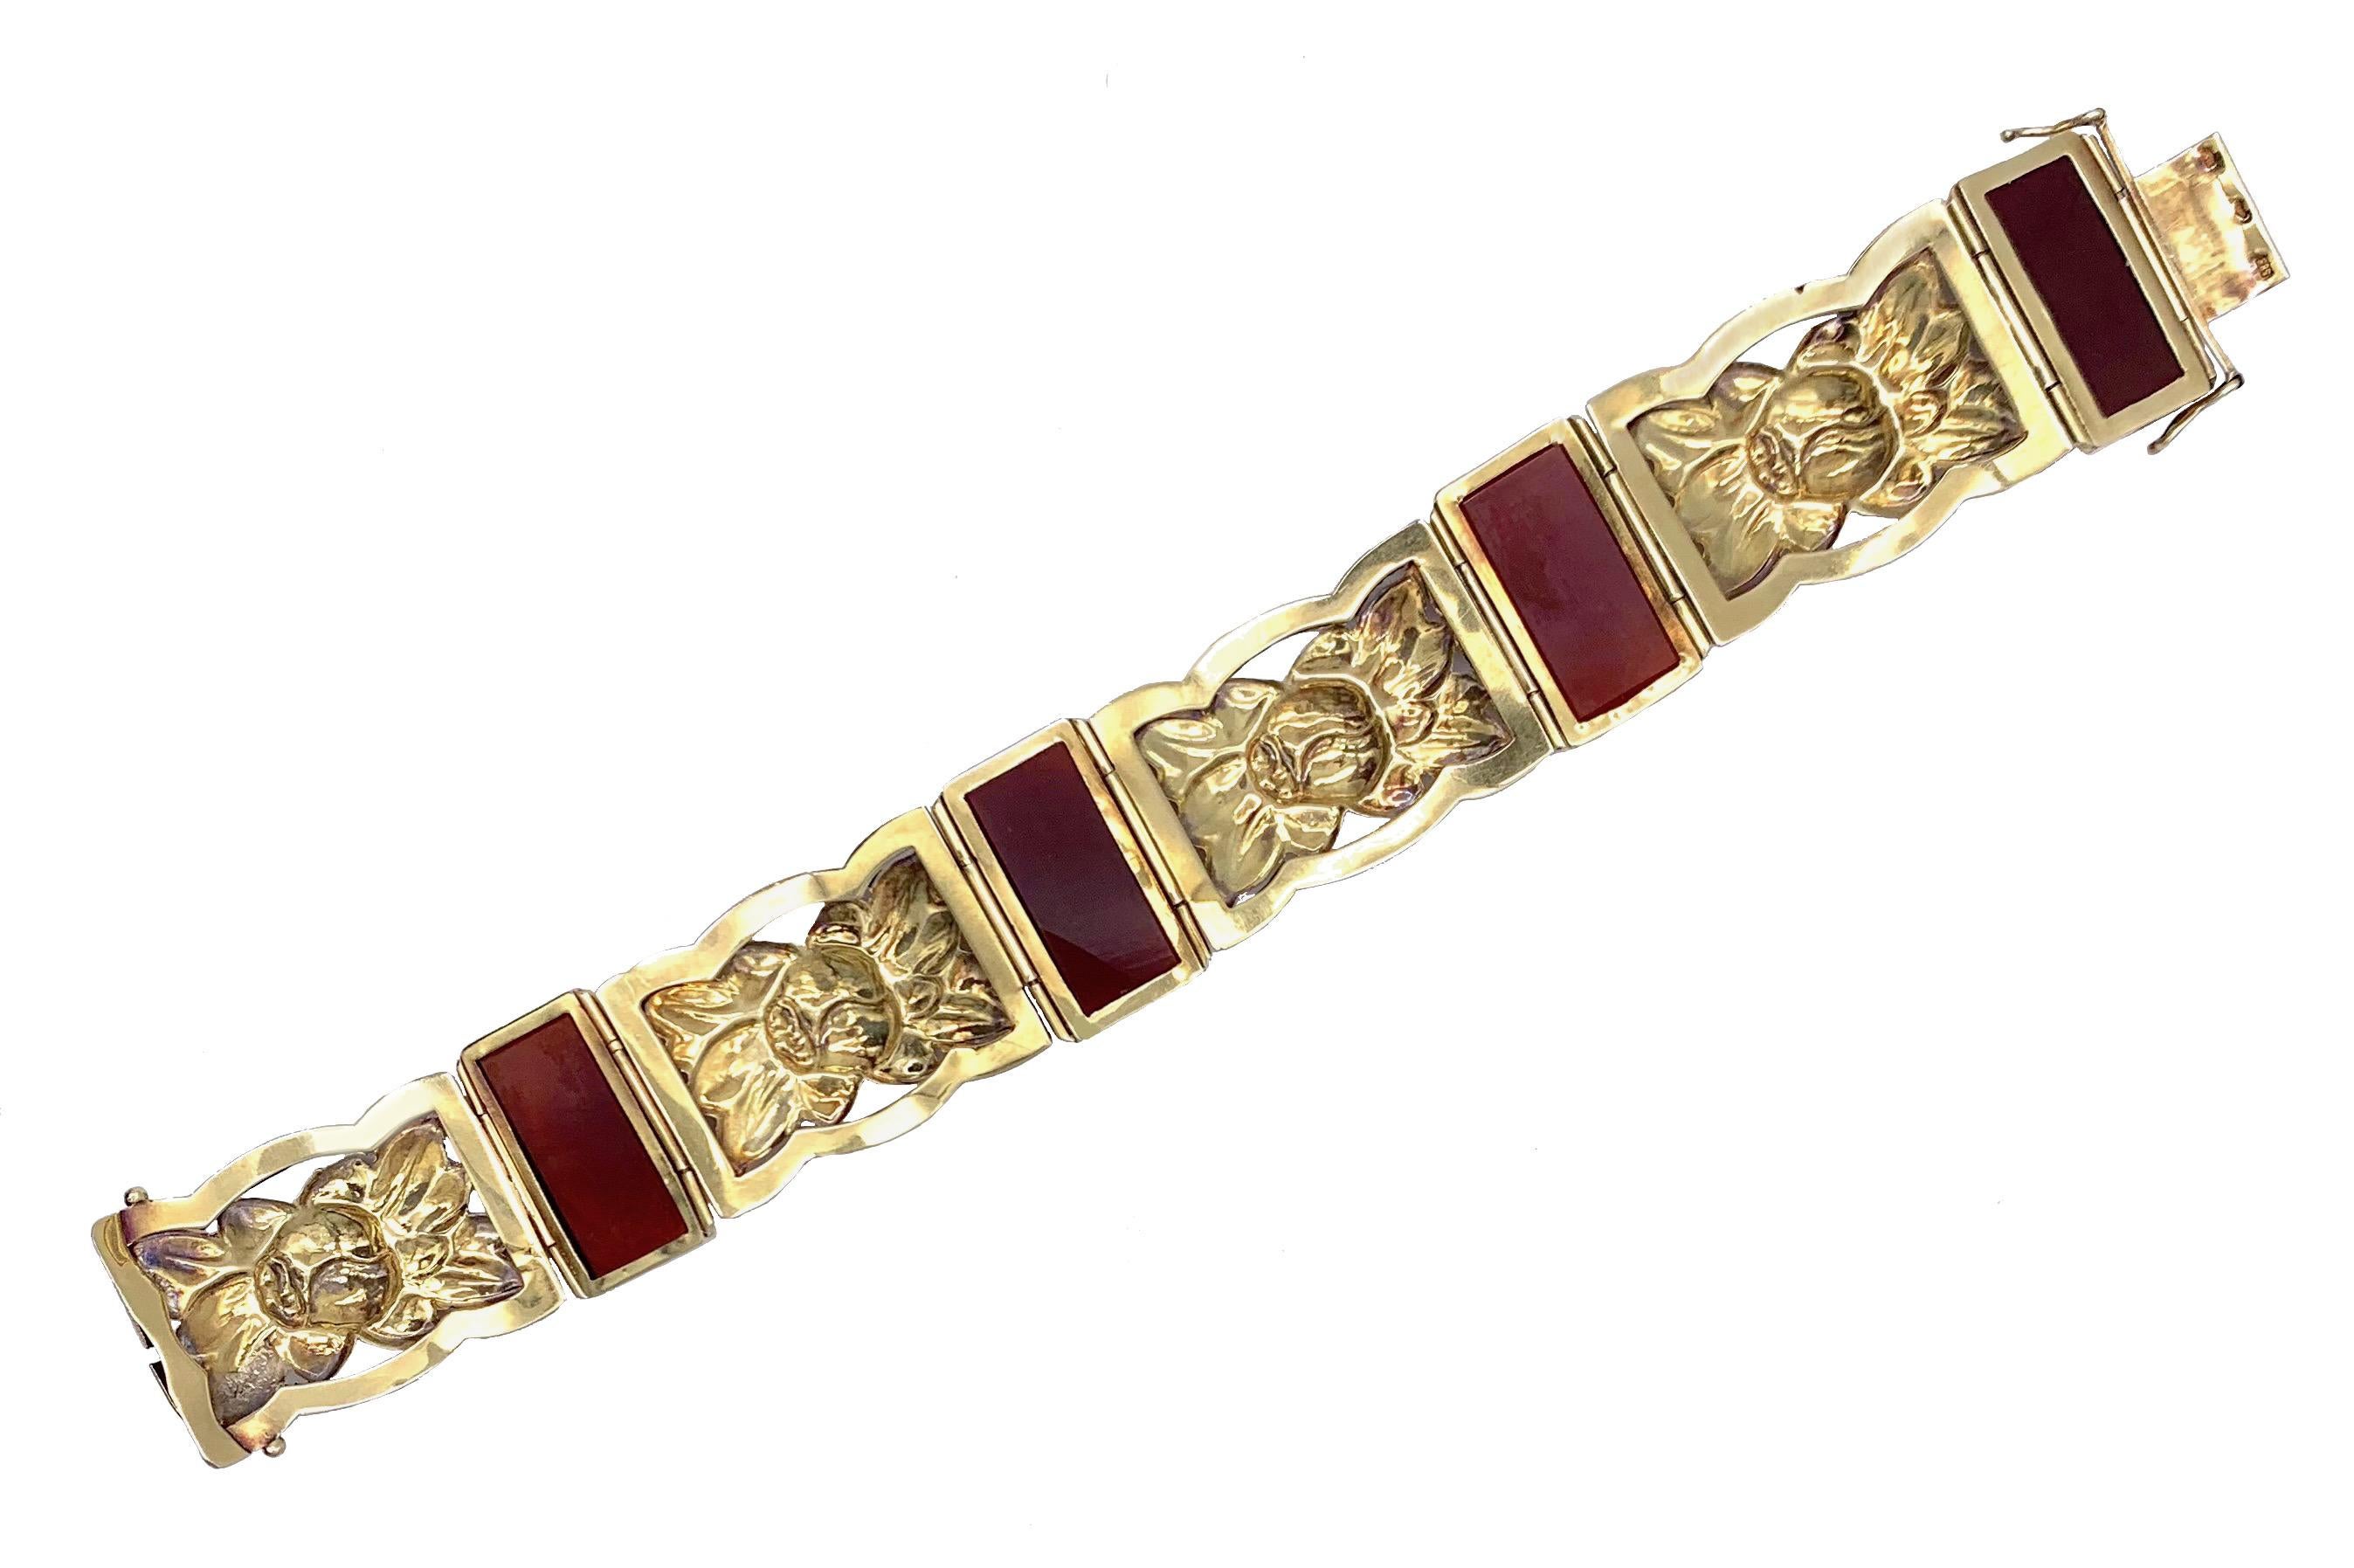 This fine Art Deco bracelet has been made by a Viennese Goldsmith in the 1920's out of 14 karat gold. Four repoussé elements decorated with flowers and leaves alternate with four rectangular plaques of carved carnelian. The bracelet has been much